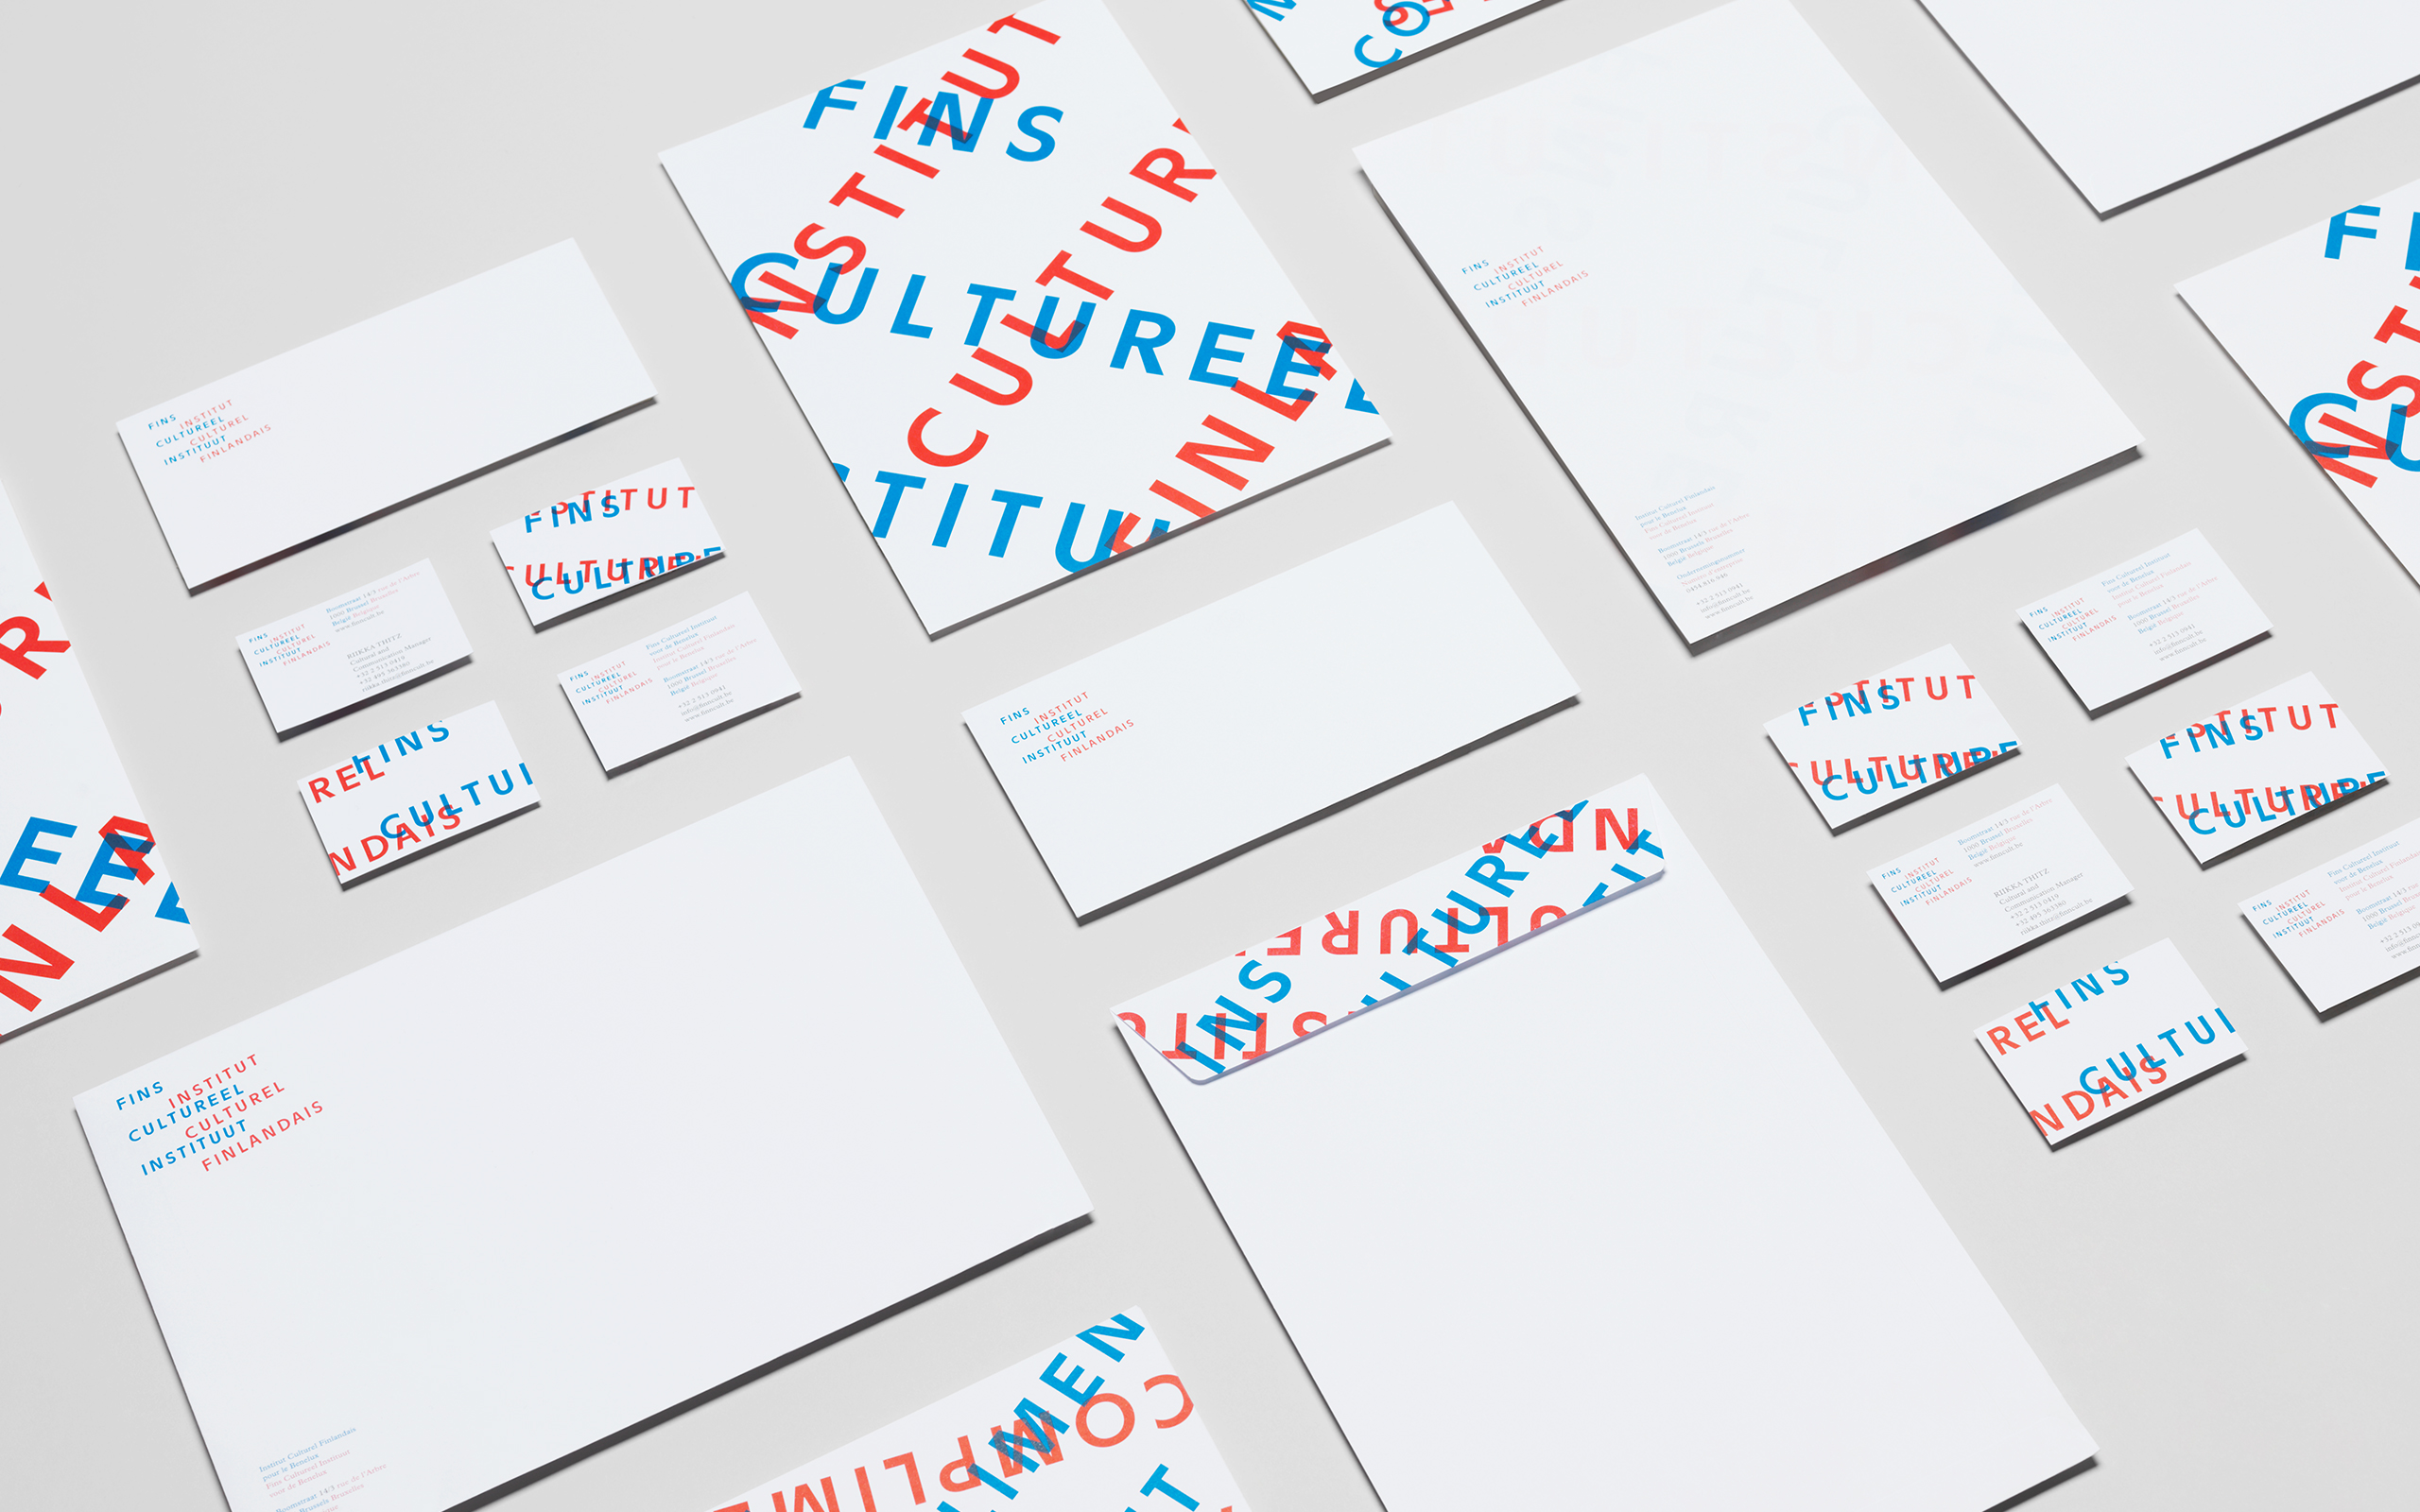 New logo and stationery with red and blue ink overprint detail designed by Kokoro & Moi for The Finnish Cultural Institute for the Benelux